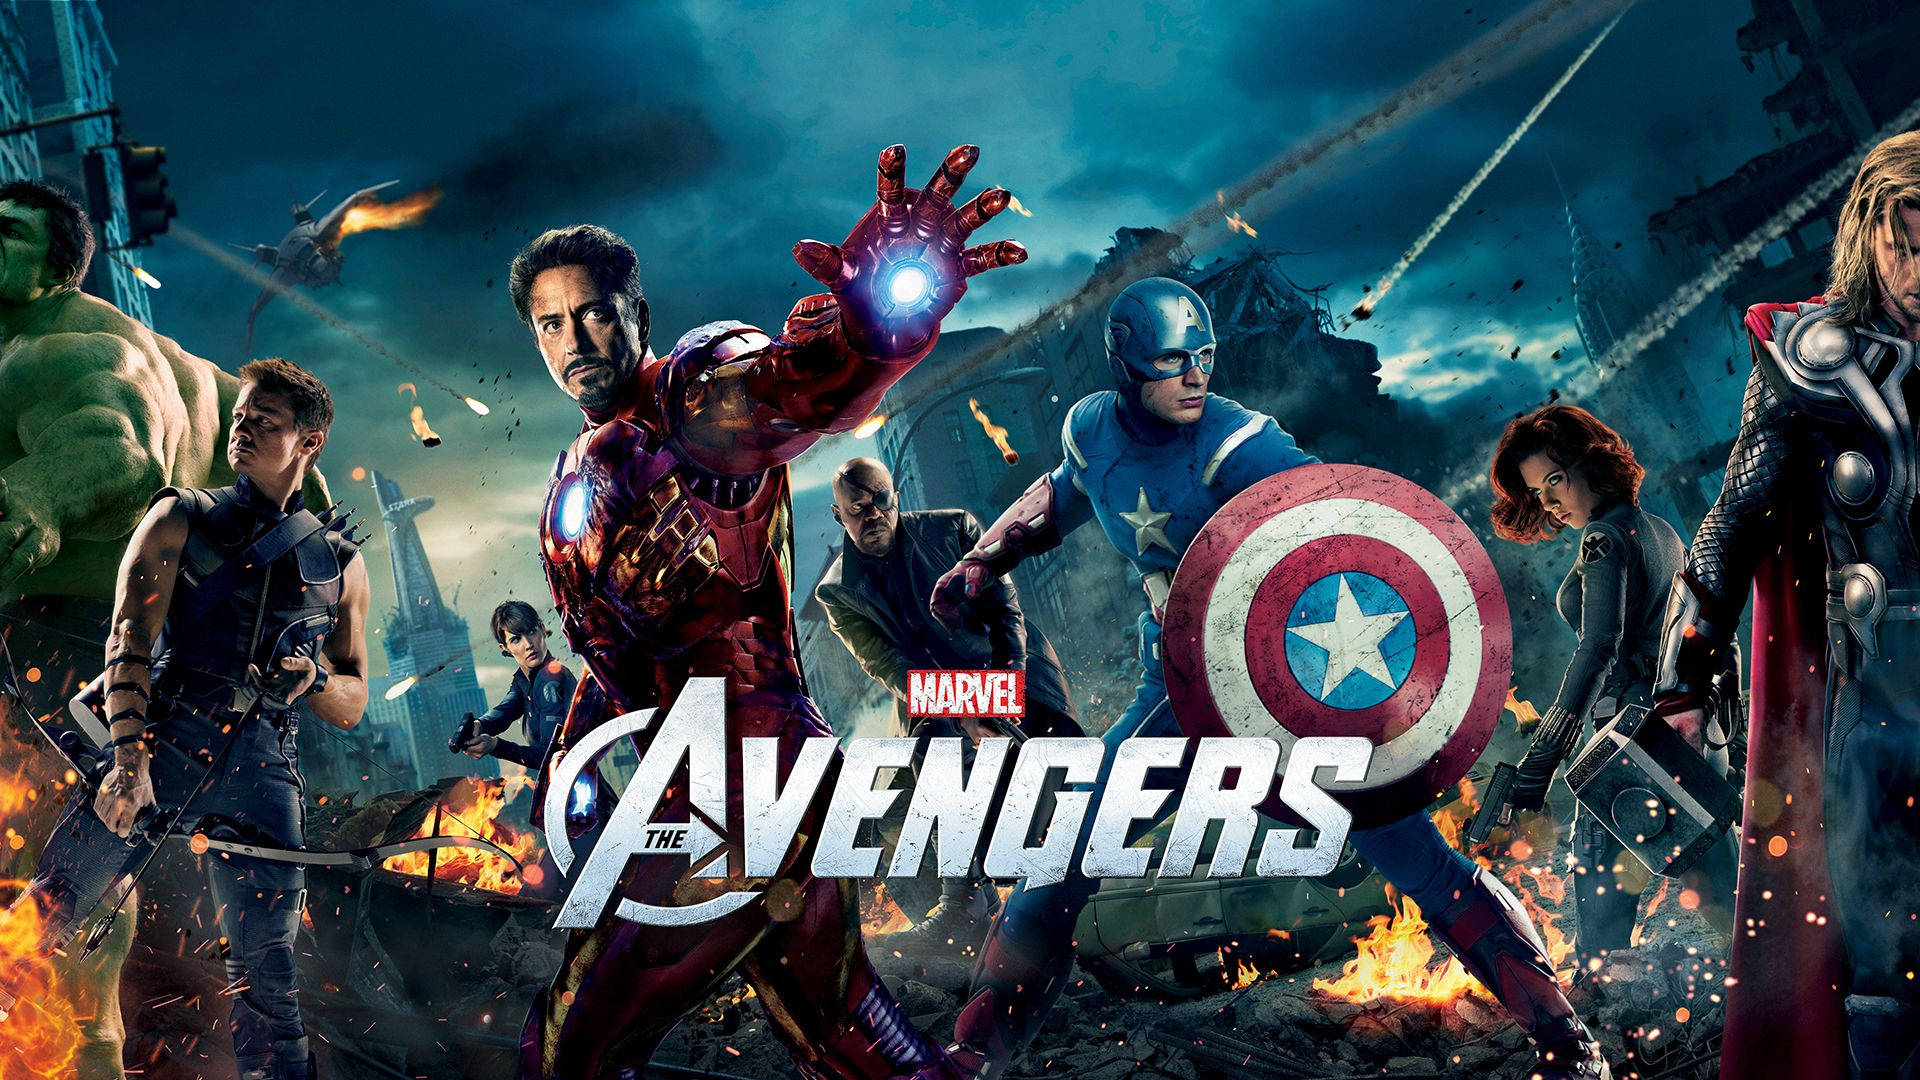 Share more than 75 avengers photos hd wallpaper latest